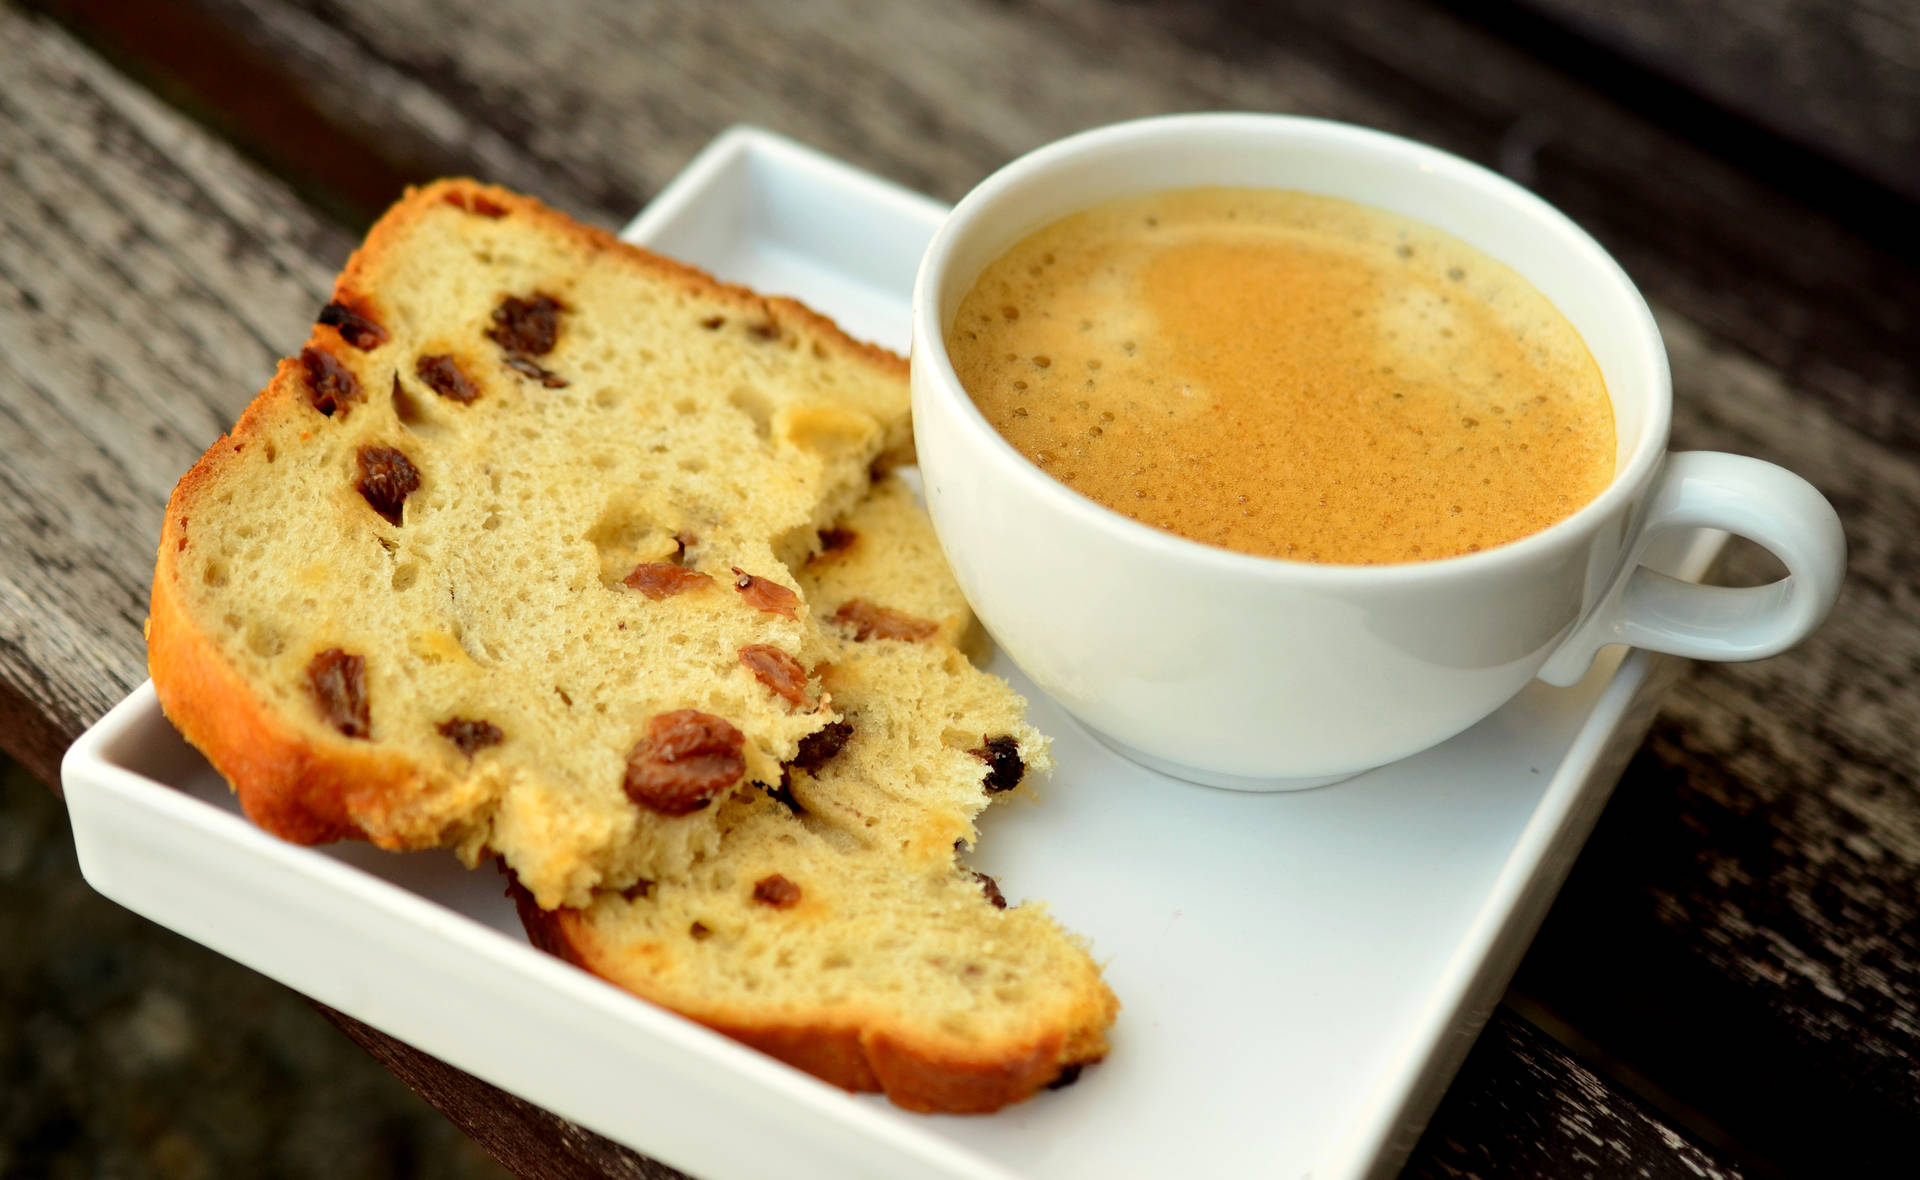 Enjoy A Slice Of Freshly-baked Coffee And Raisin Loaf! Background